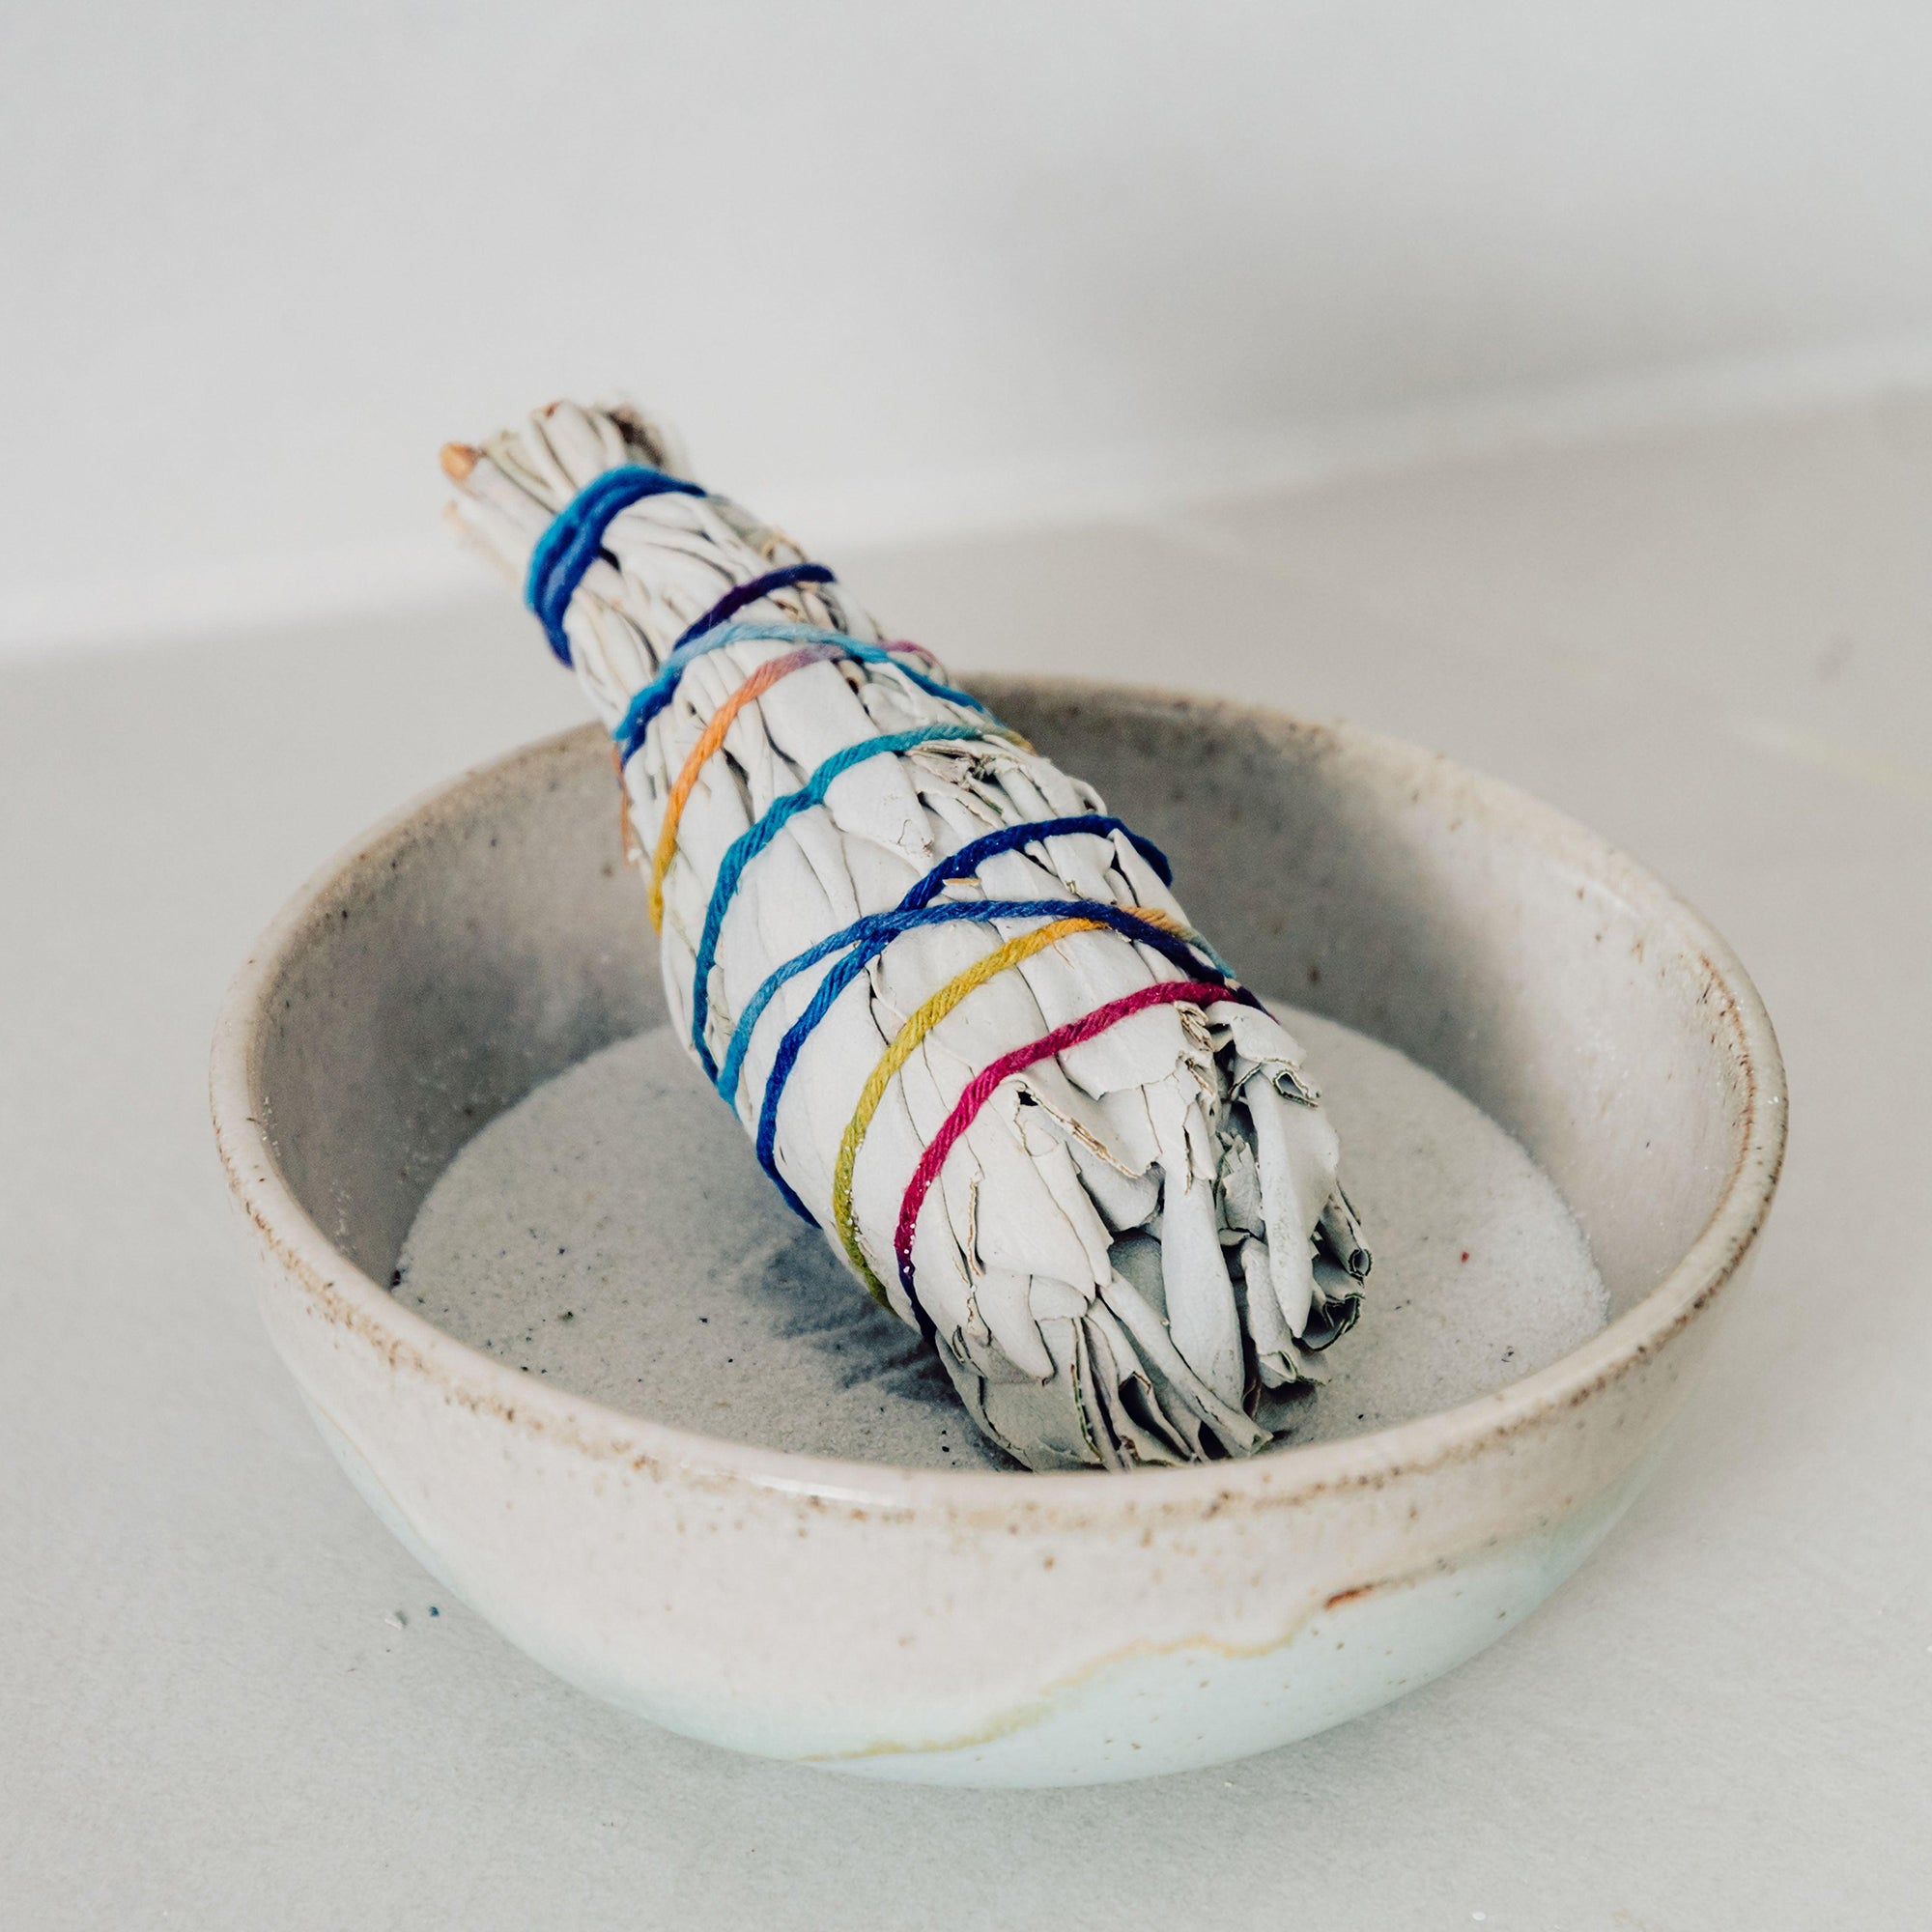 White sage smudge stick and incense bowl with sand.